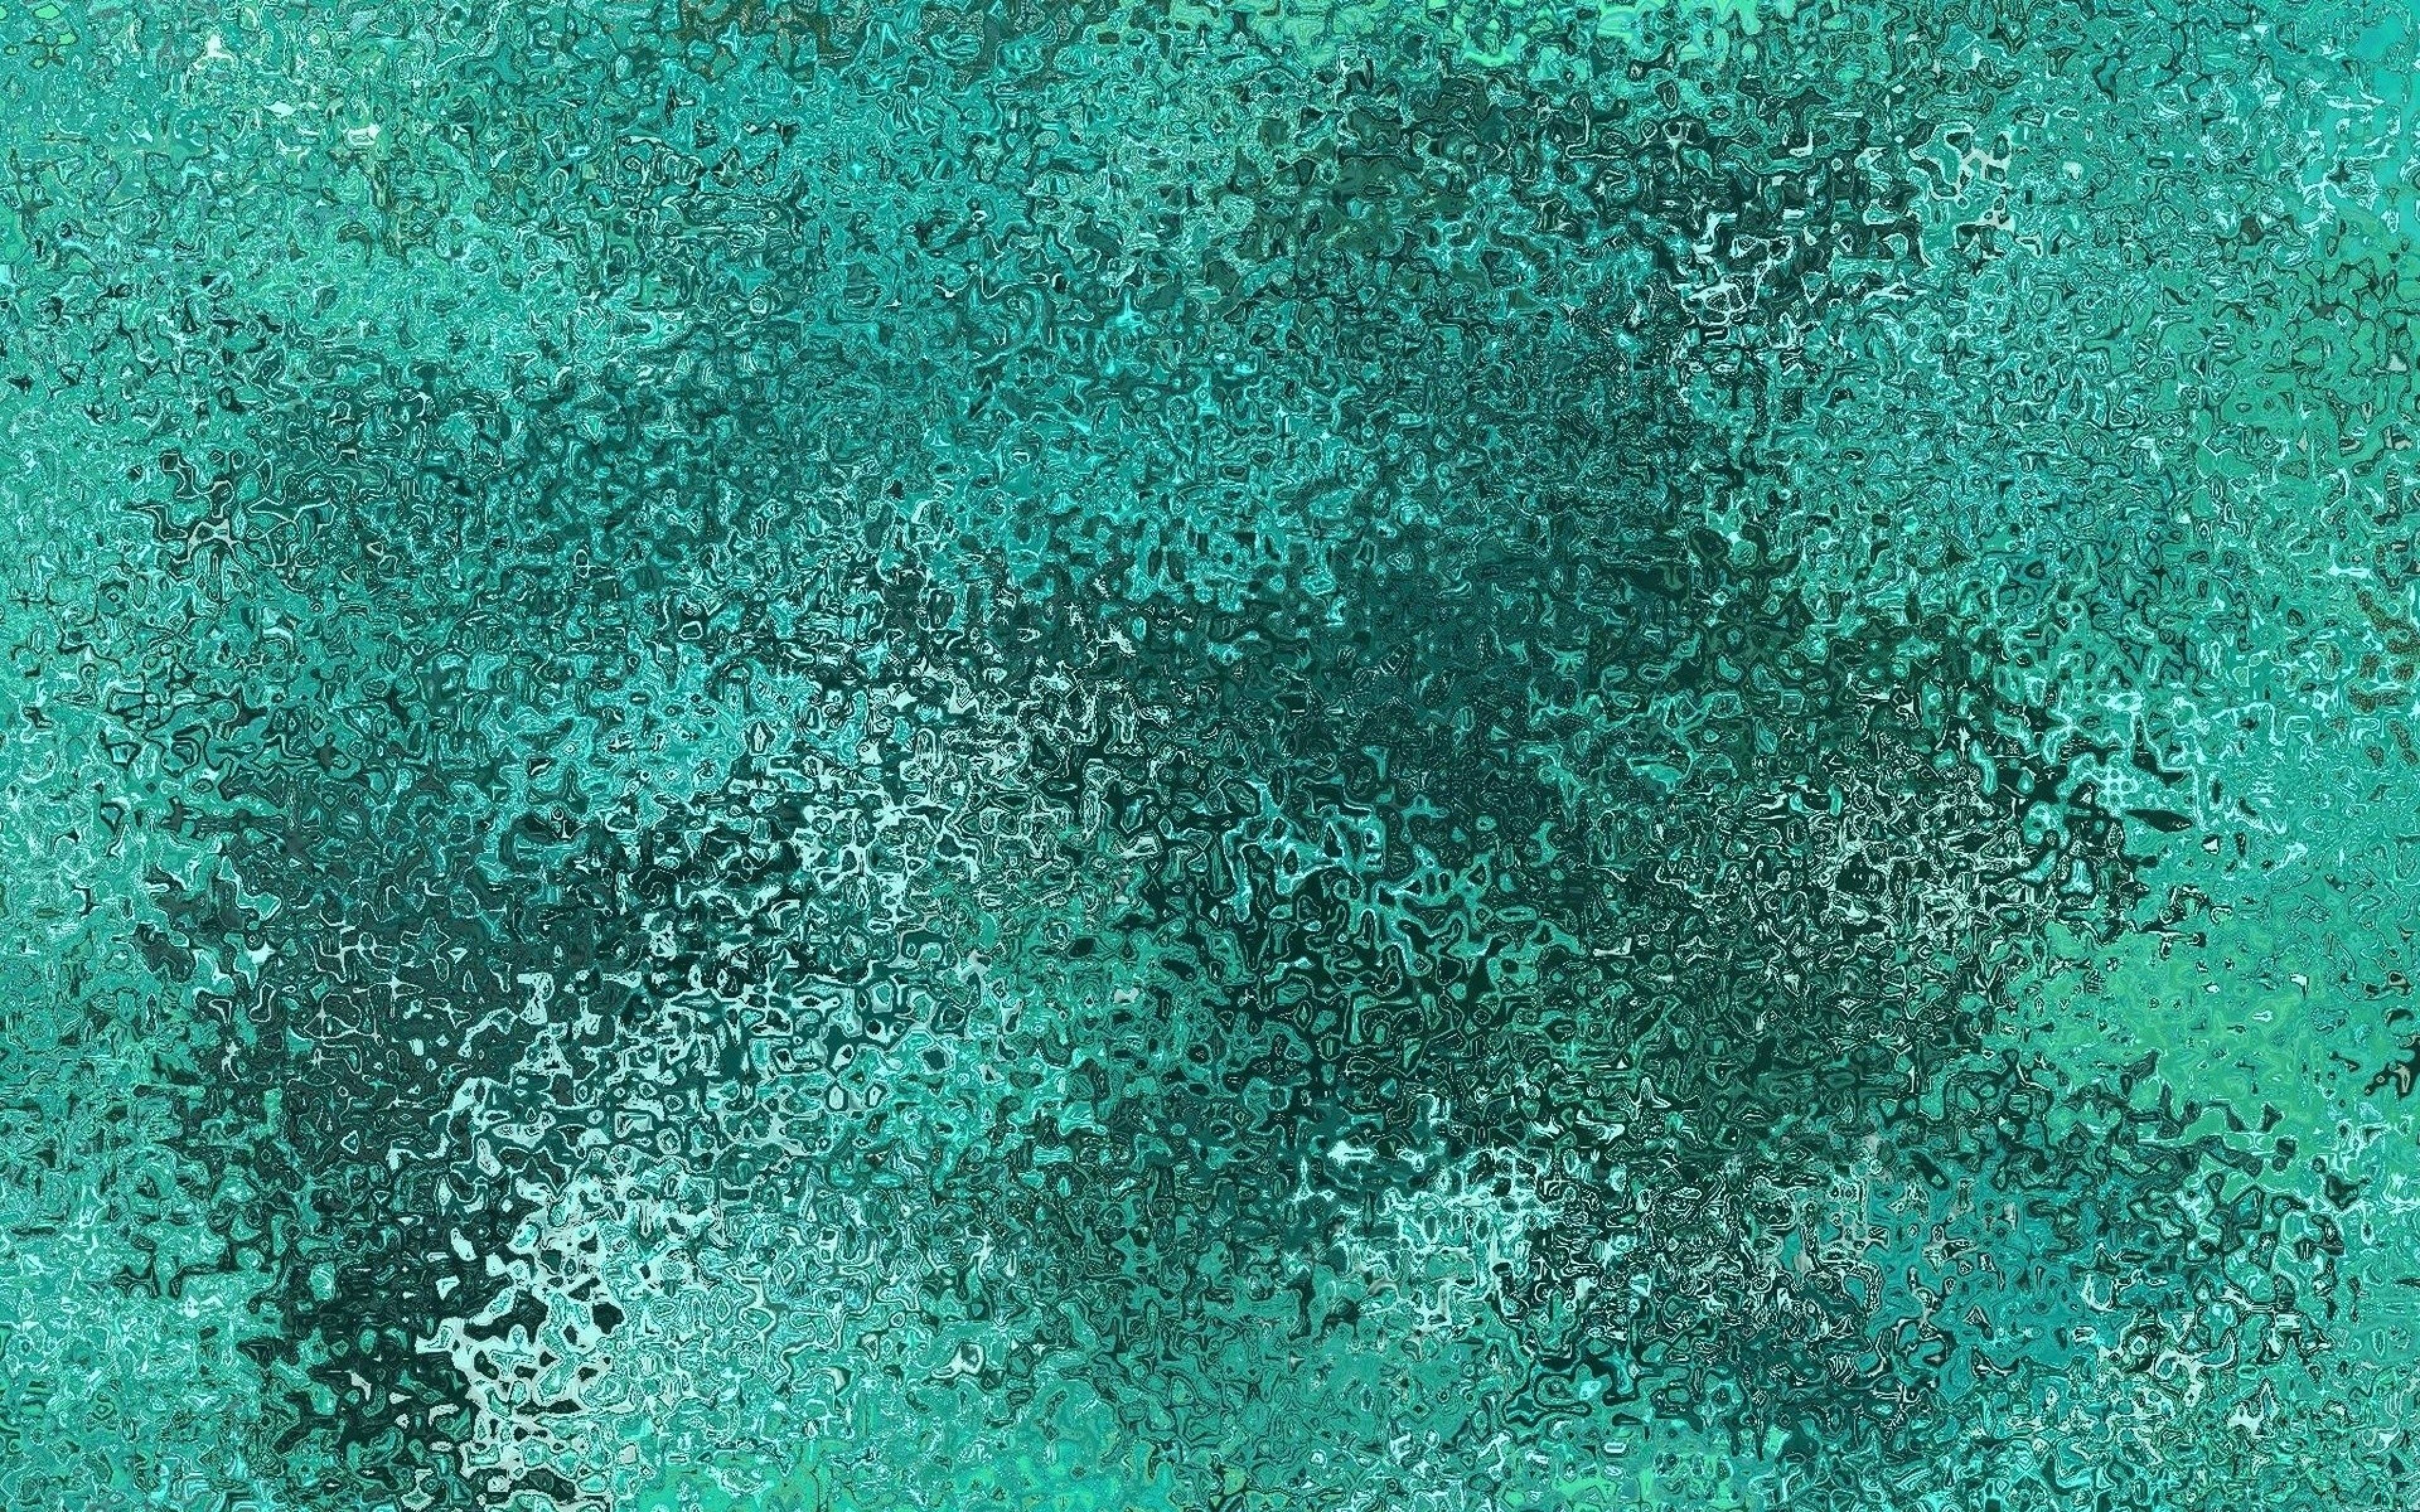 Teal HD Image Background Teal Green Background